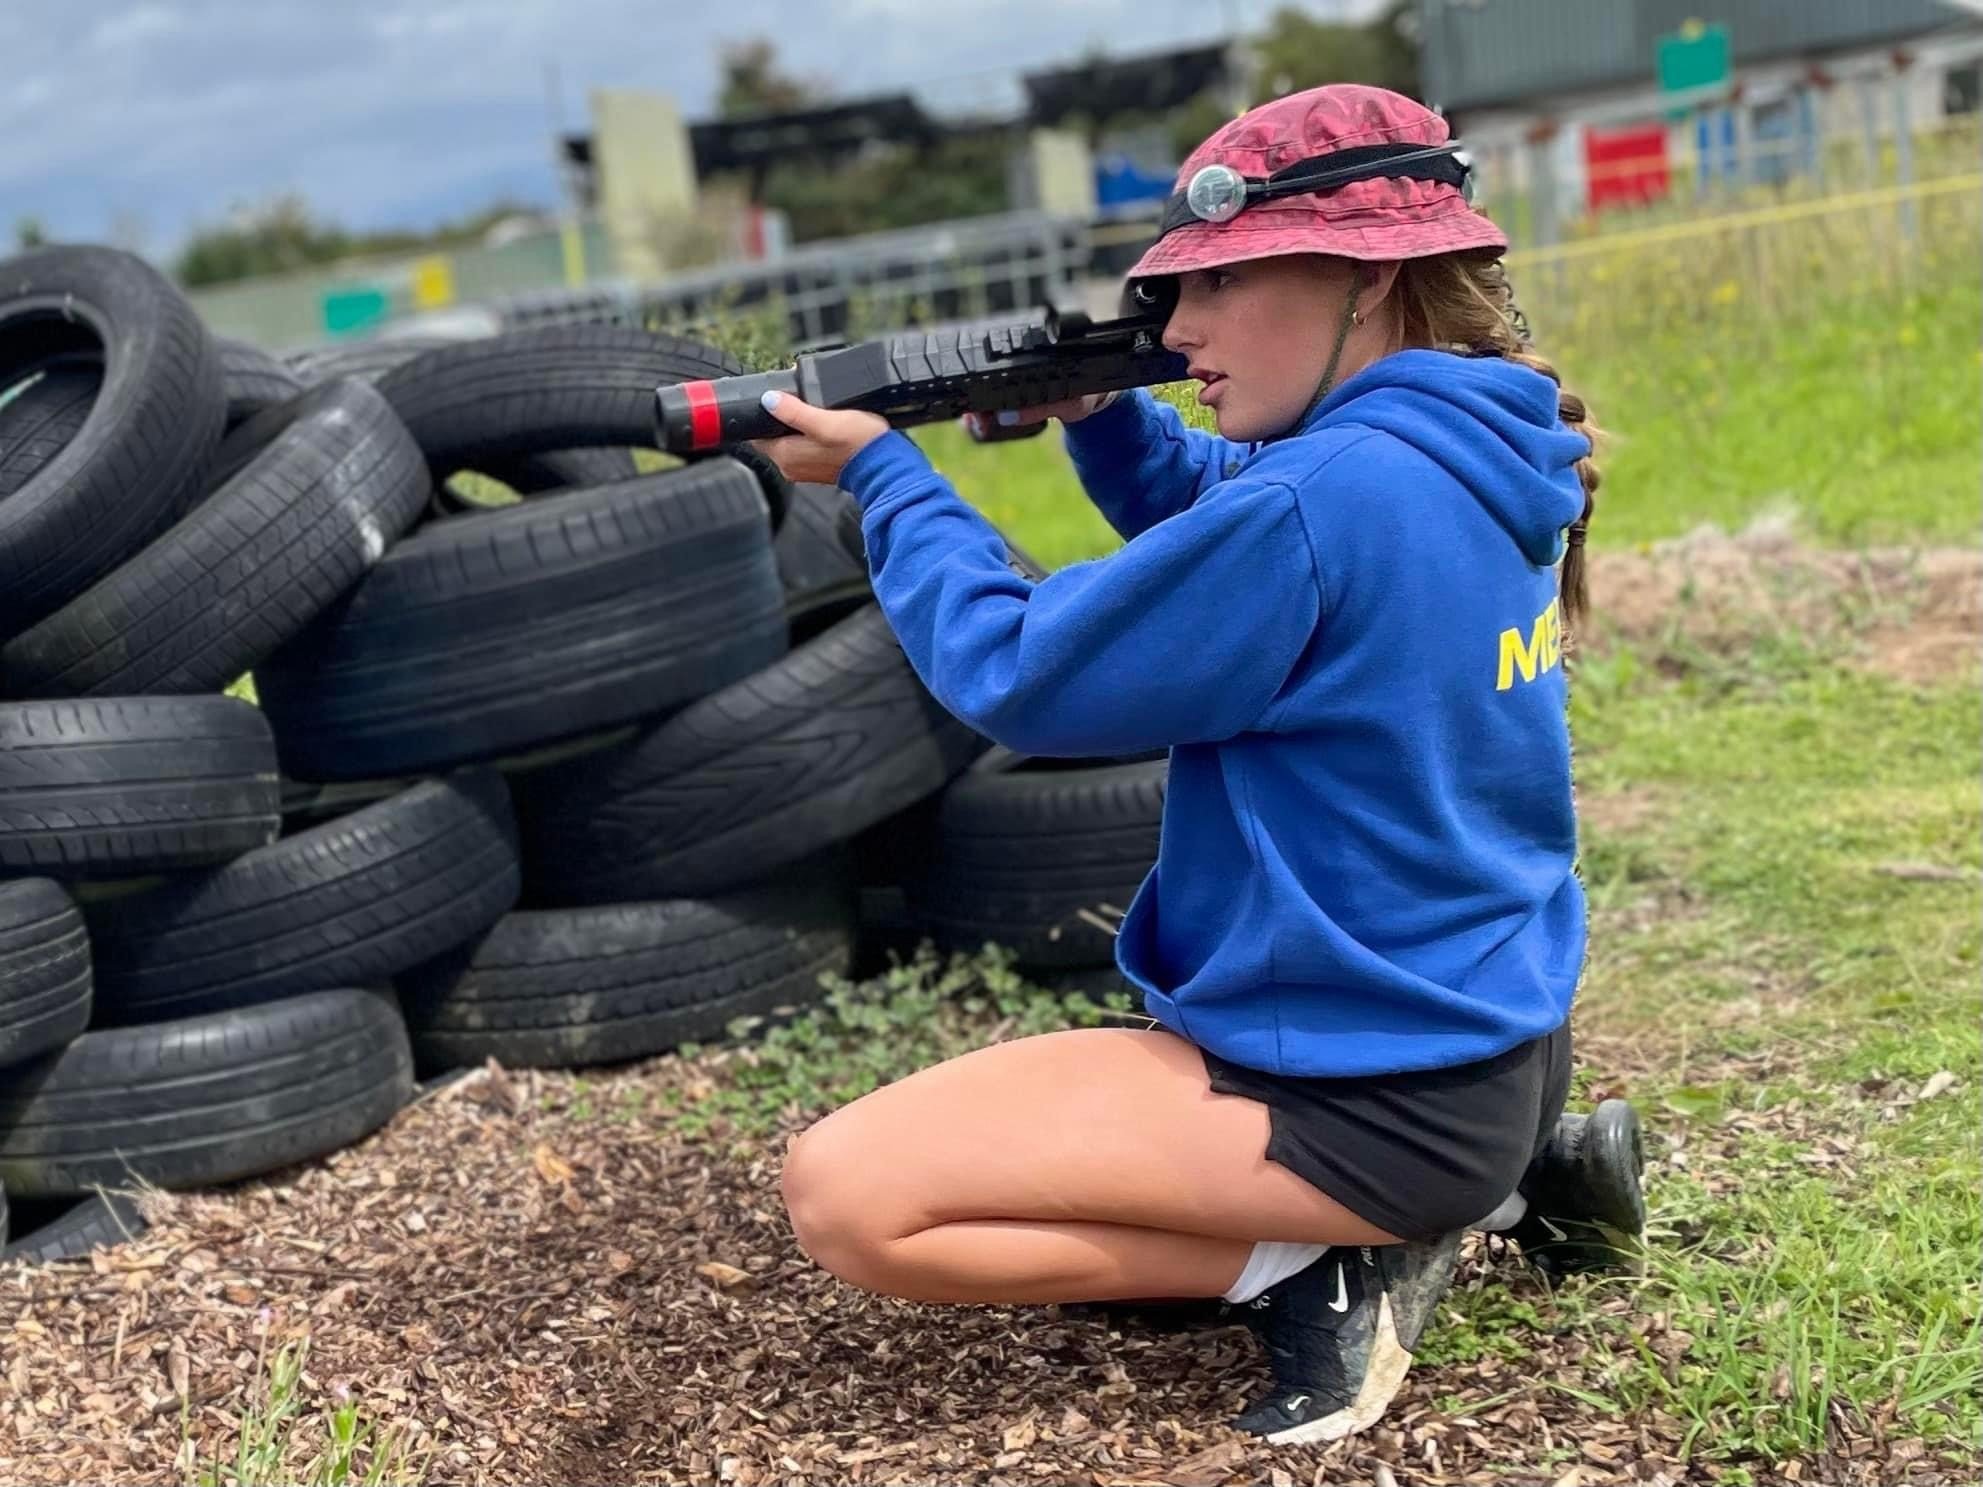 Outdoor Laser Tag – Public open session